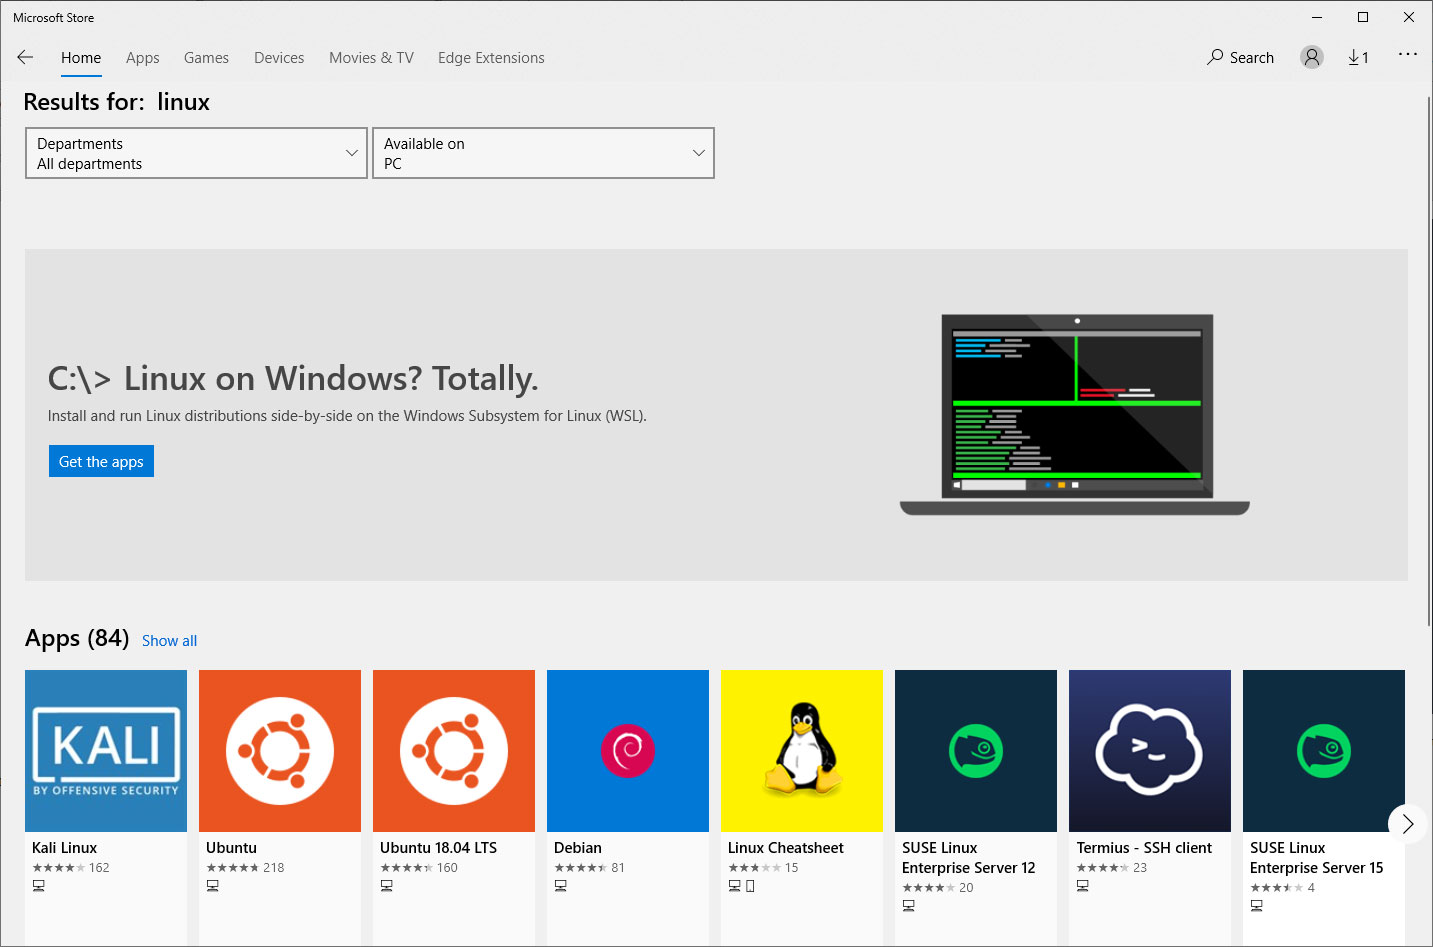 Linux distributions in the Microsoft Store